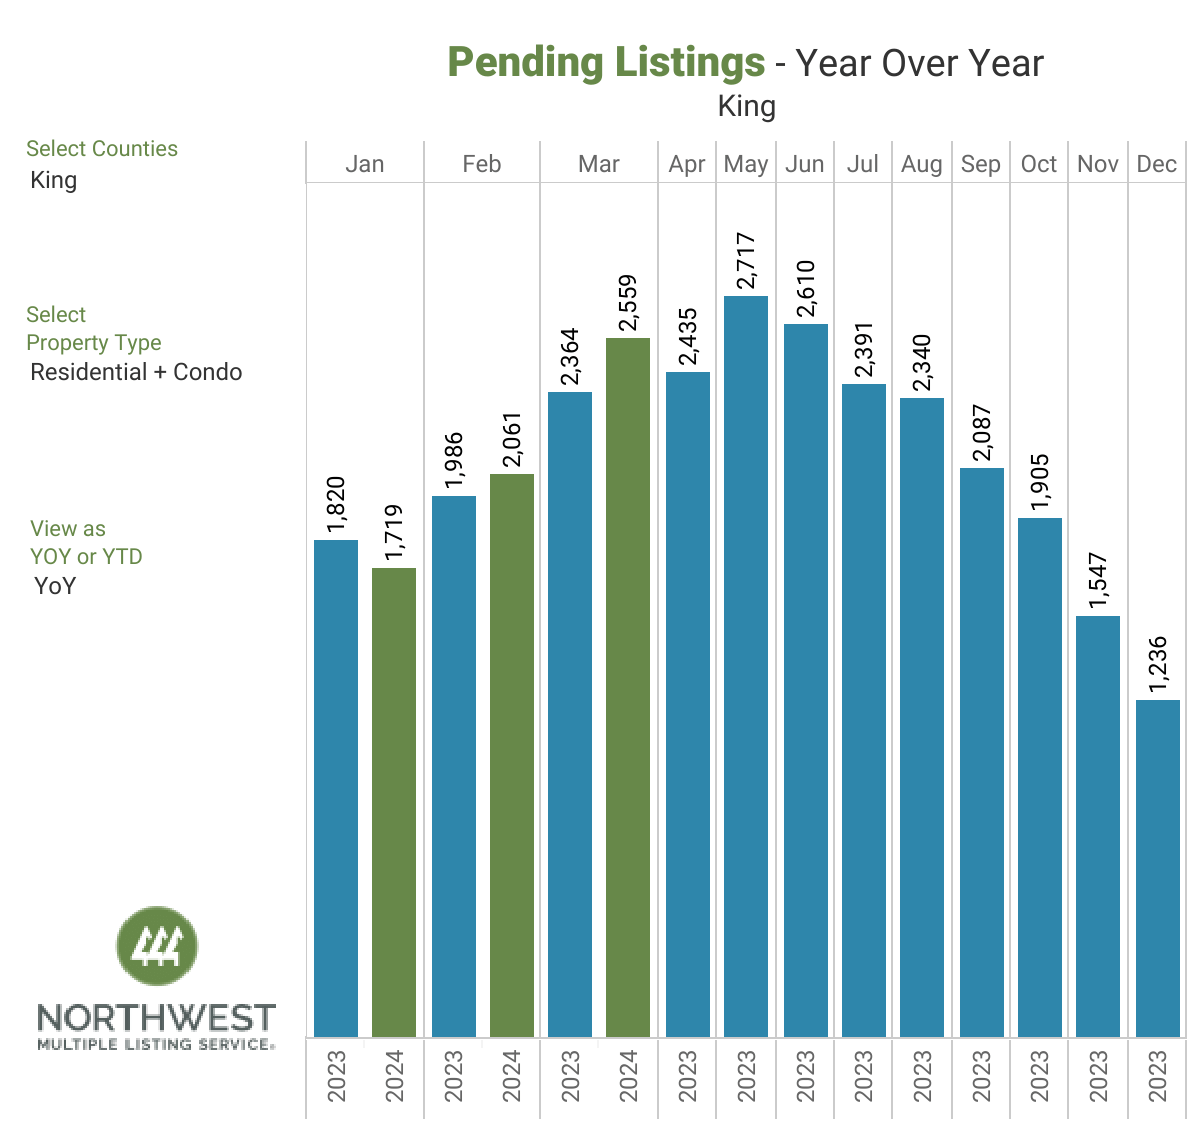 Information and statistics compiled and reported by the Northwest Multiple Listing Service.